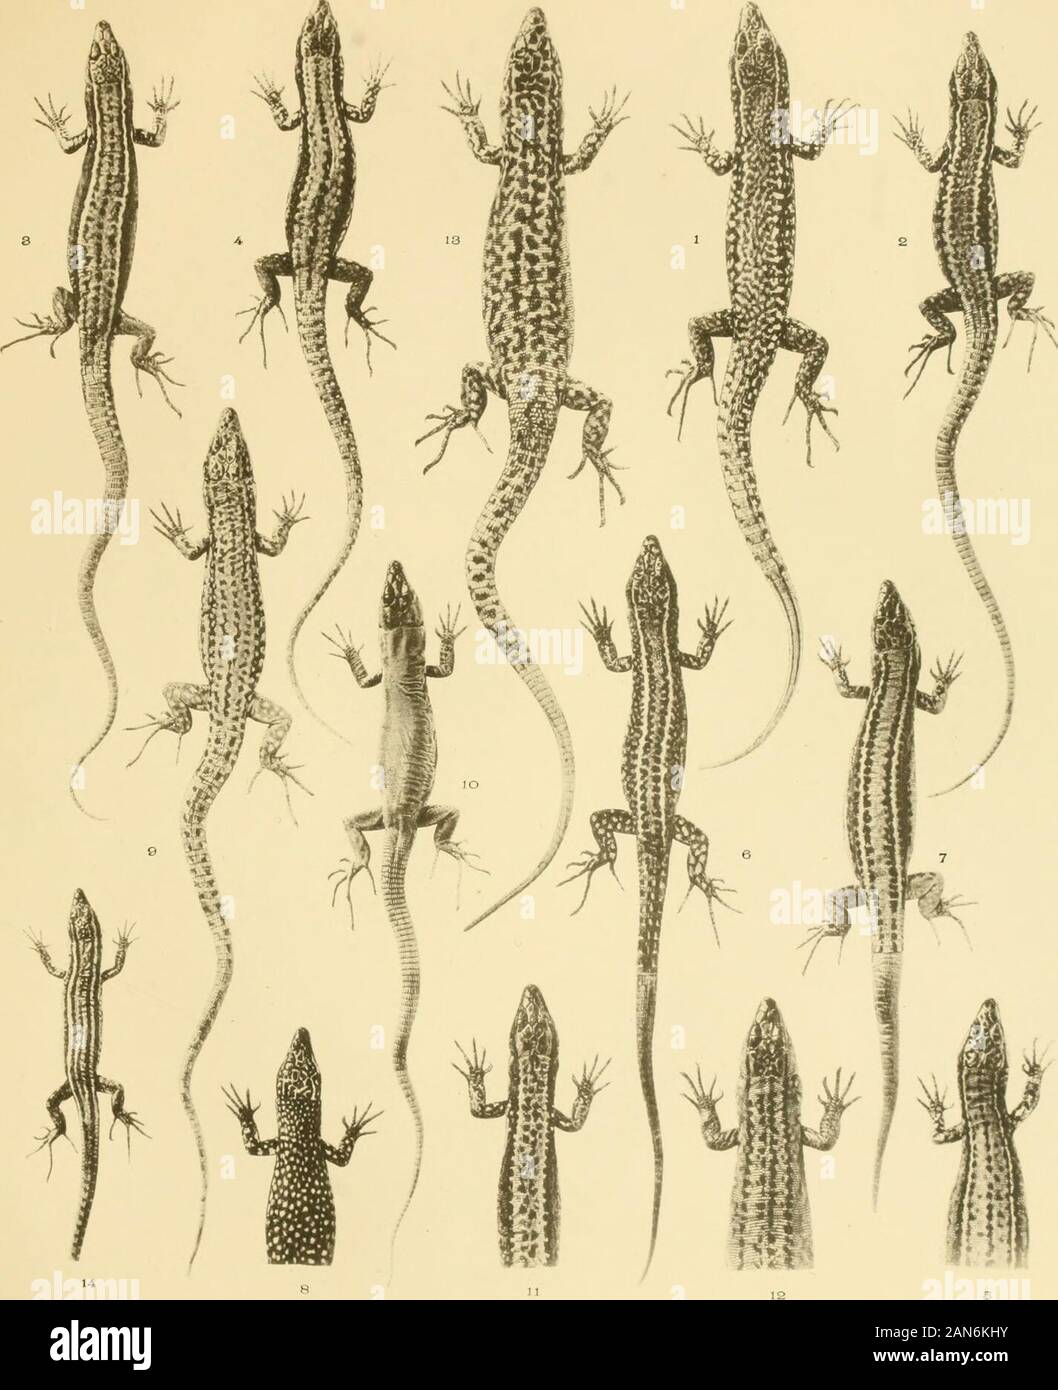 A contribution to our knowledge of the varieties of the wall-lizard (Lacerta muralis) in Western Europe and North Africa . &lt;E &lt;hKUO &lt;J PLATE XXIV. 3 k2 426 VARIETIES OF LACEETA MURALIS IN W. EUROPE AND N, AFRICA. PLATE XXIV. Lacerta miiralis. Fig. 1. F.ti/pica, d . Fontainebleau (Lataste Coll.) (p. 356). Natural size. 2. „ „ Dinant, Belgium (p. 356). 3. „ ?. „ „ (p. 355). 4. „ ., Domodossola, Piedmont (p. 355). 5. ,, ,, High Pyrenees (Lataste Coll.) (p. 358). 6. Var. bocagei Seoane, 6 . Galicia ,, (p. 362). 7. „ ., ?. „ „ (p. 362). 8. ,, „ 6. SerradeGerez,Portugal (p. 362). 9. Var. li Stock Photo